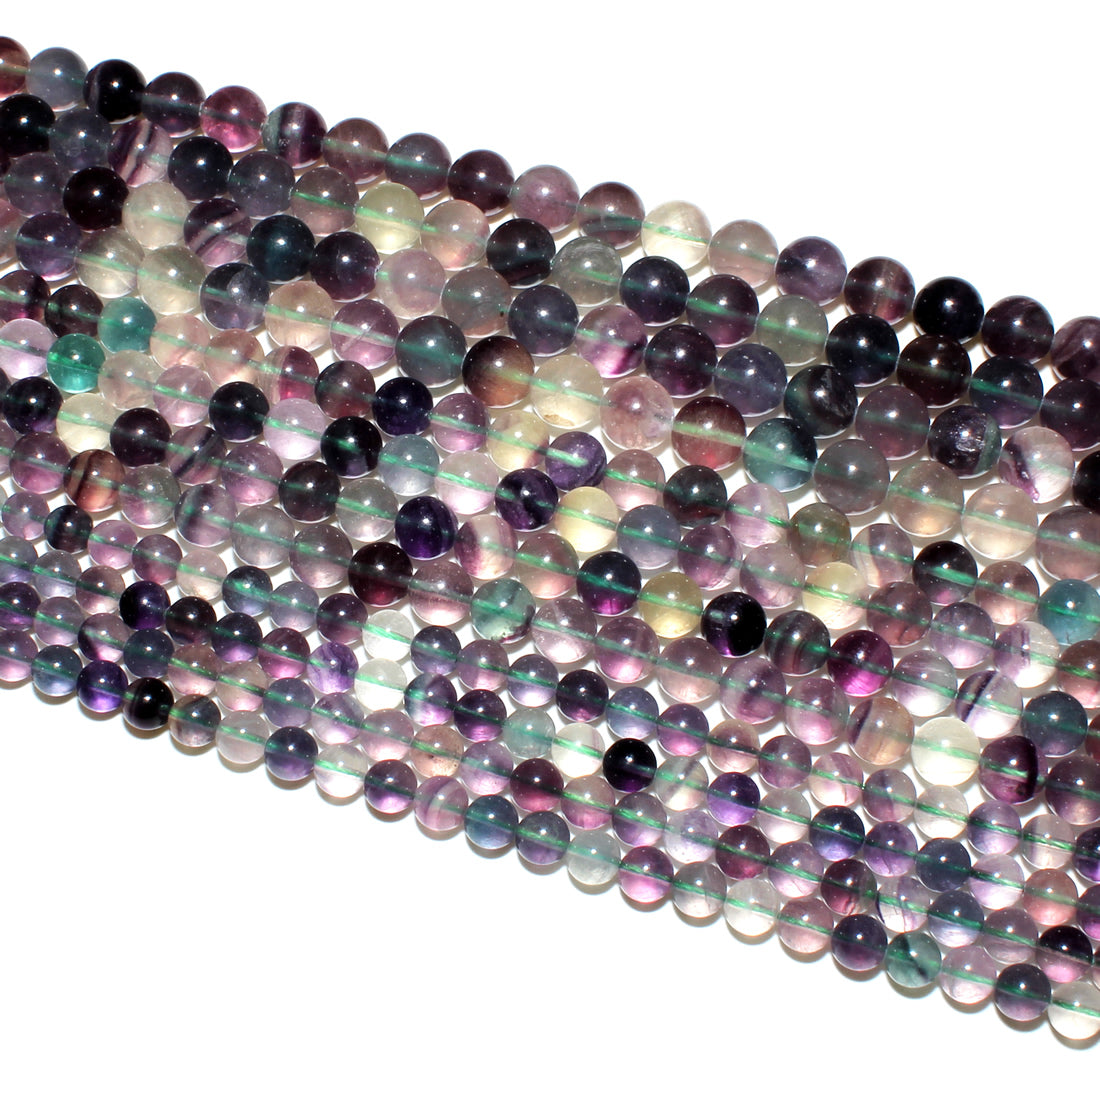 Fluorite 8mm Beads mixed colors - NEW222